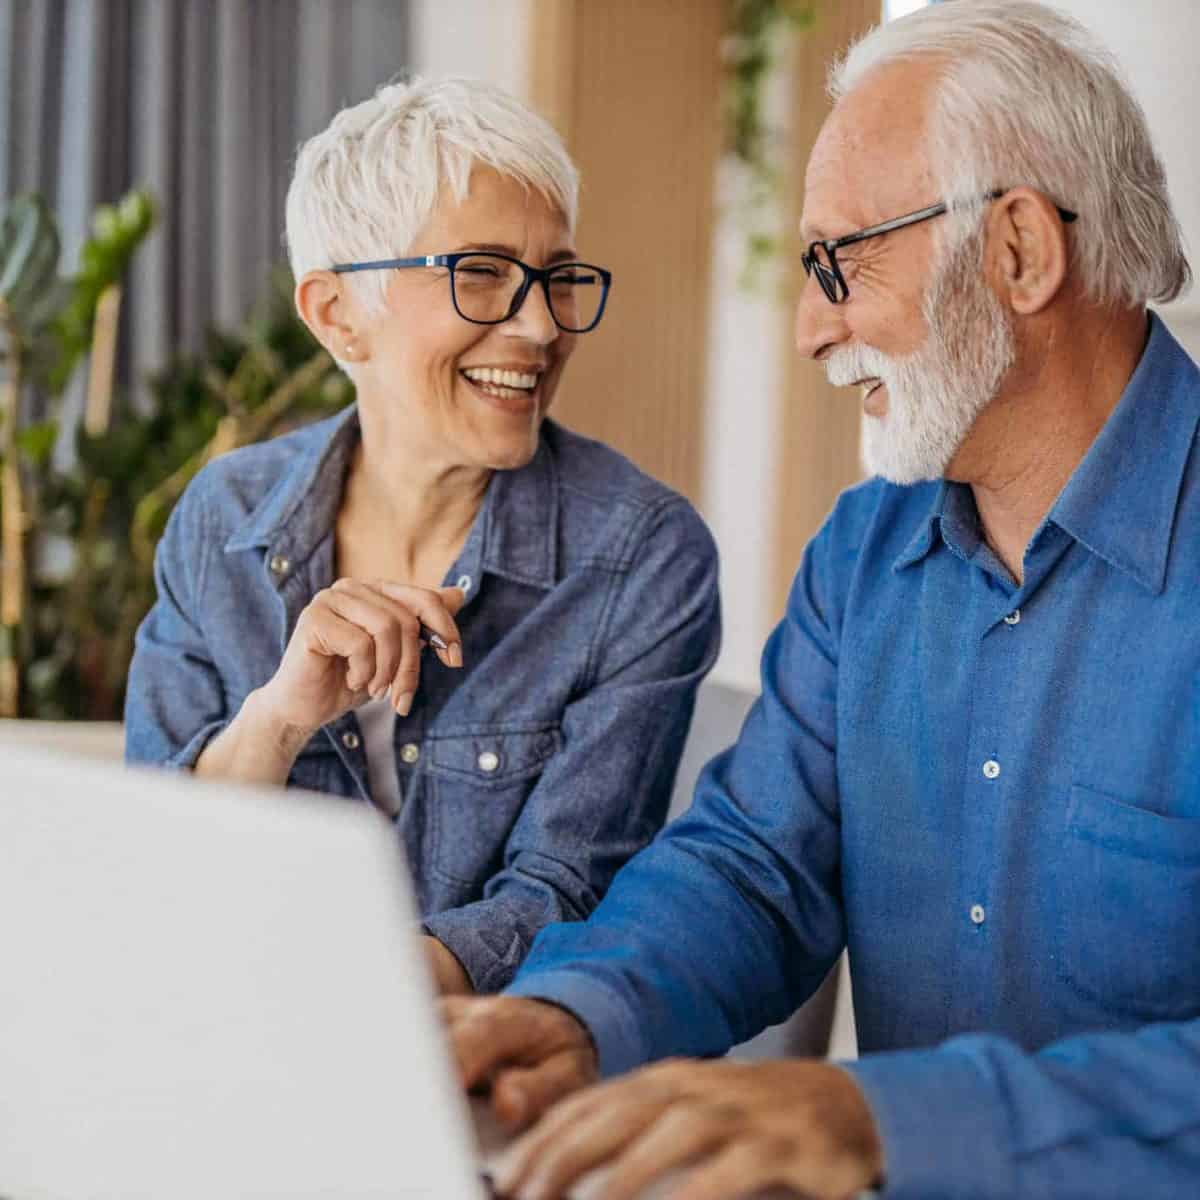 NEW CUYAMA Precious Metals IRA & Investing Company Copy of Senior couple at laptop smiling GettyImages 1323096524 1200x1200 1